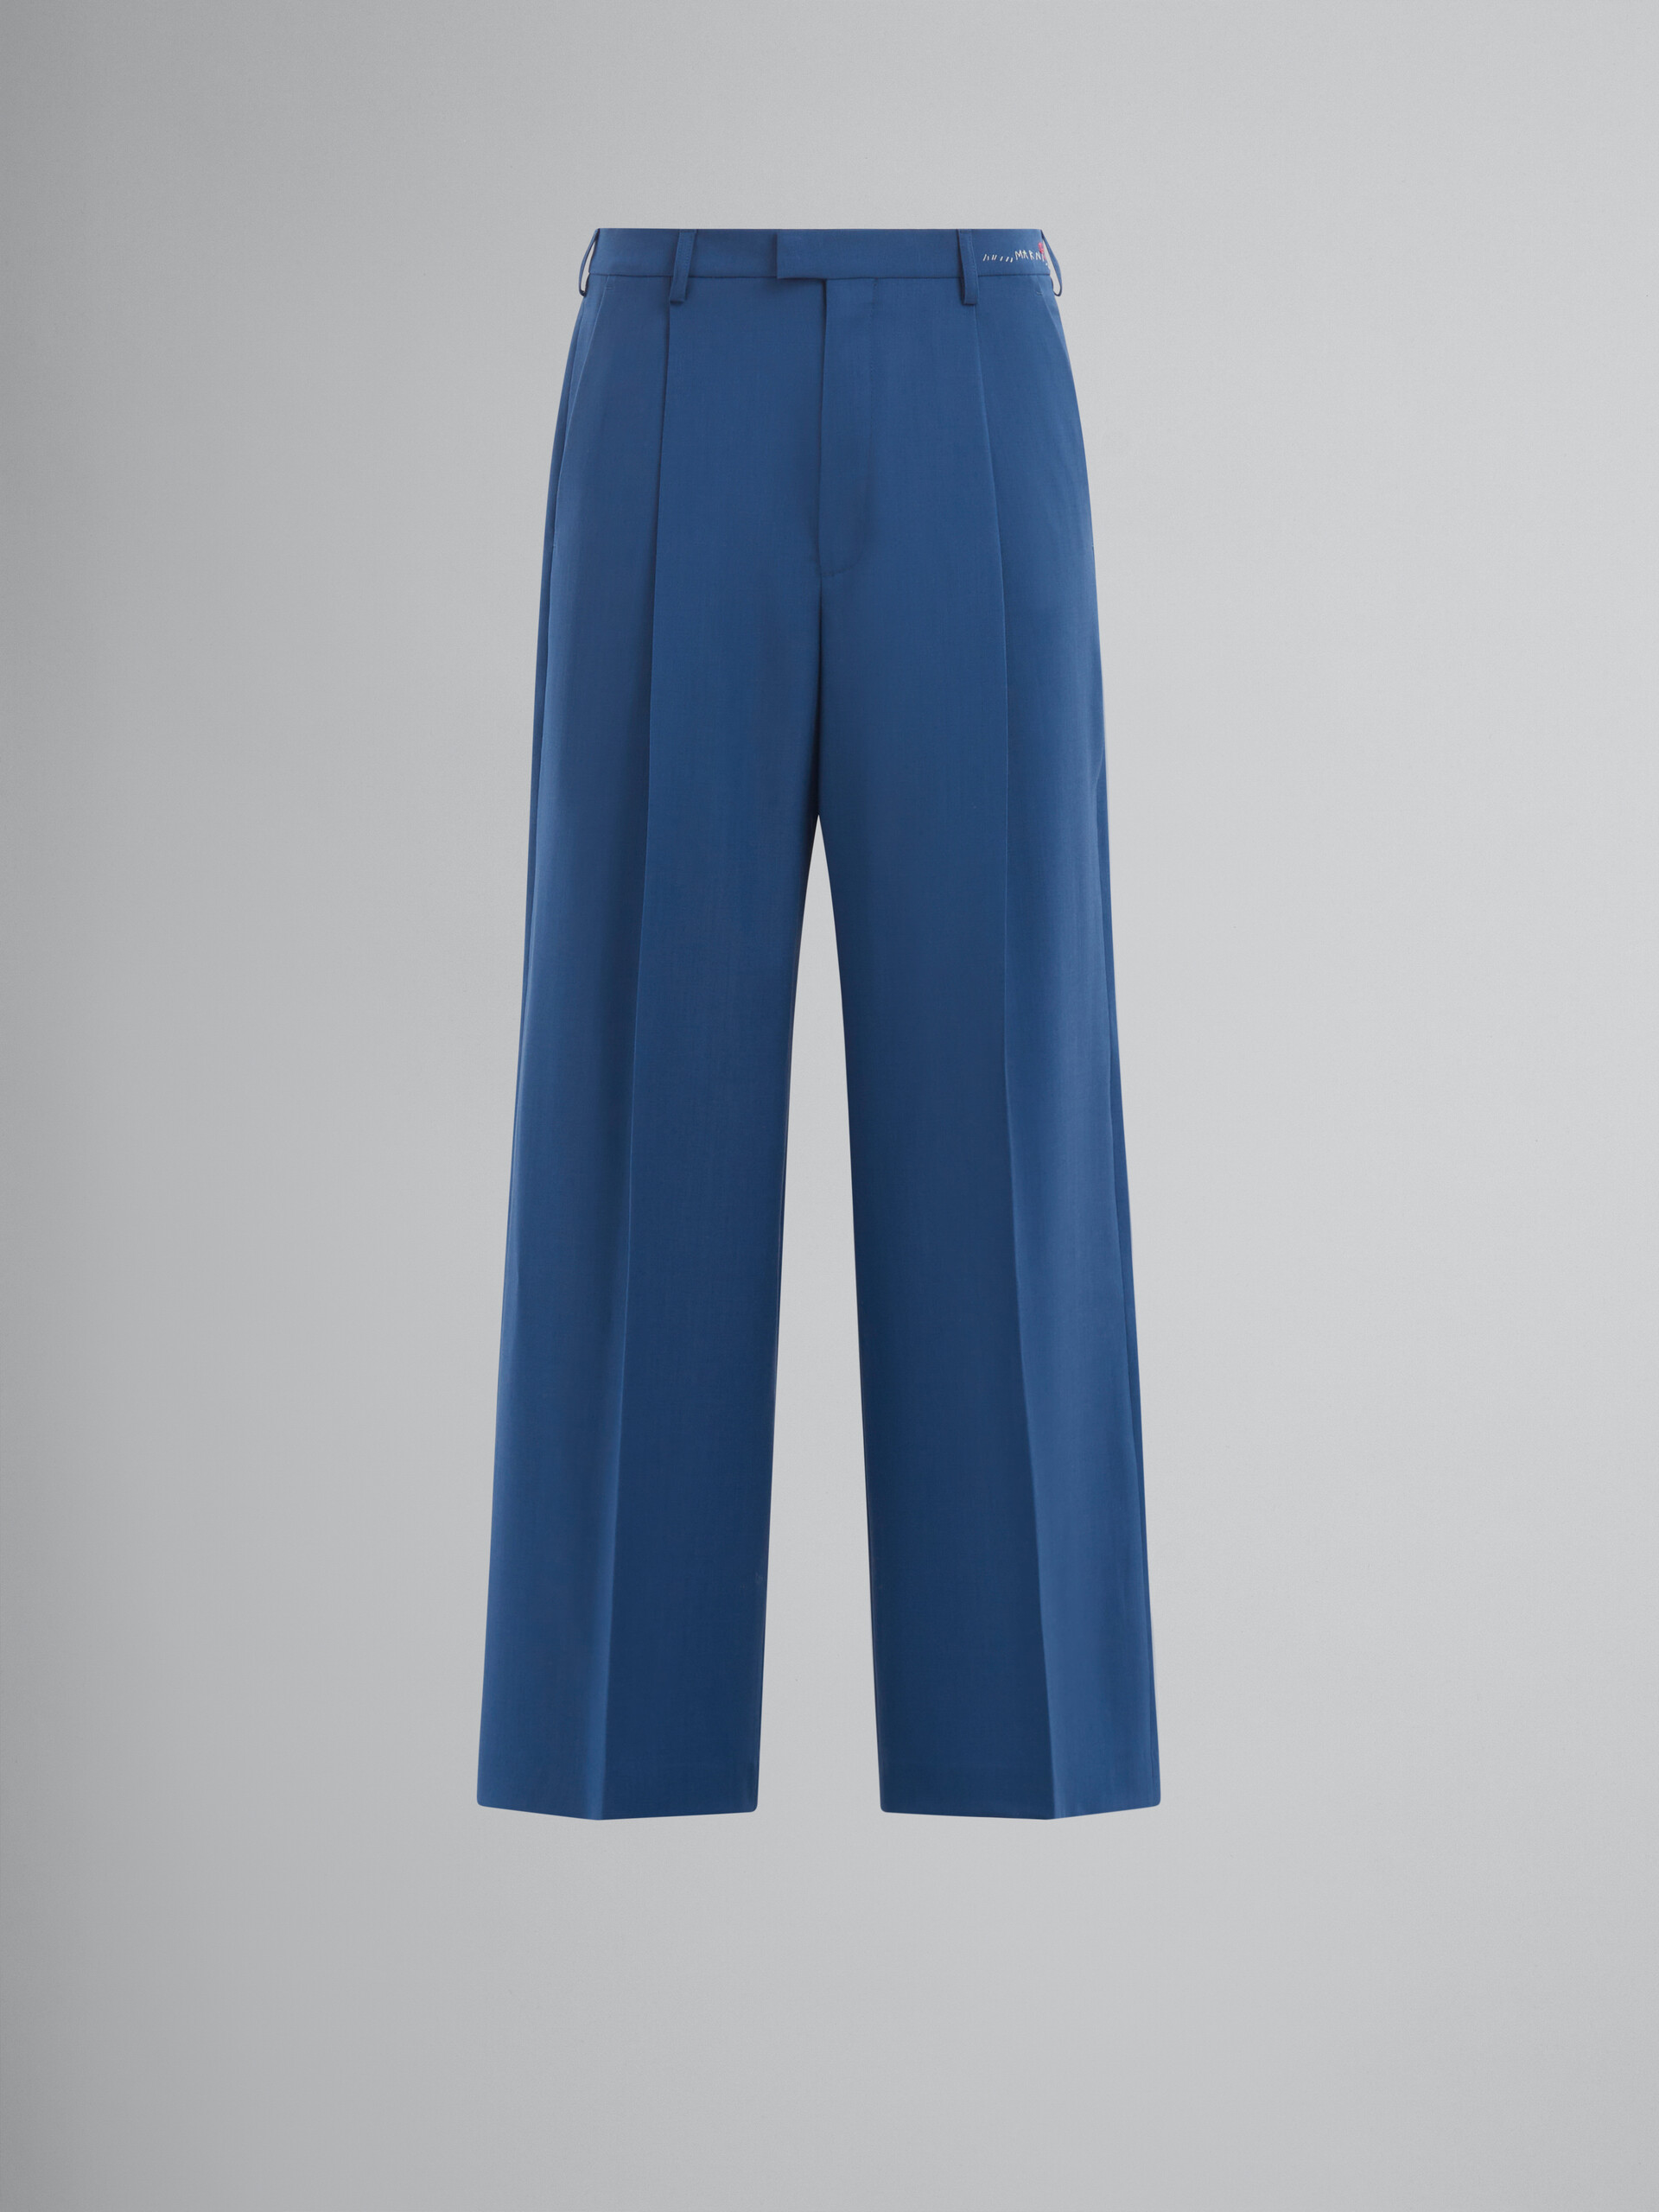 Blue wool-mohair trousers with pleats - Pants - Image 1